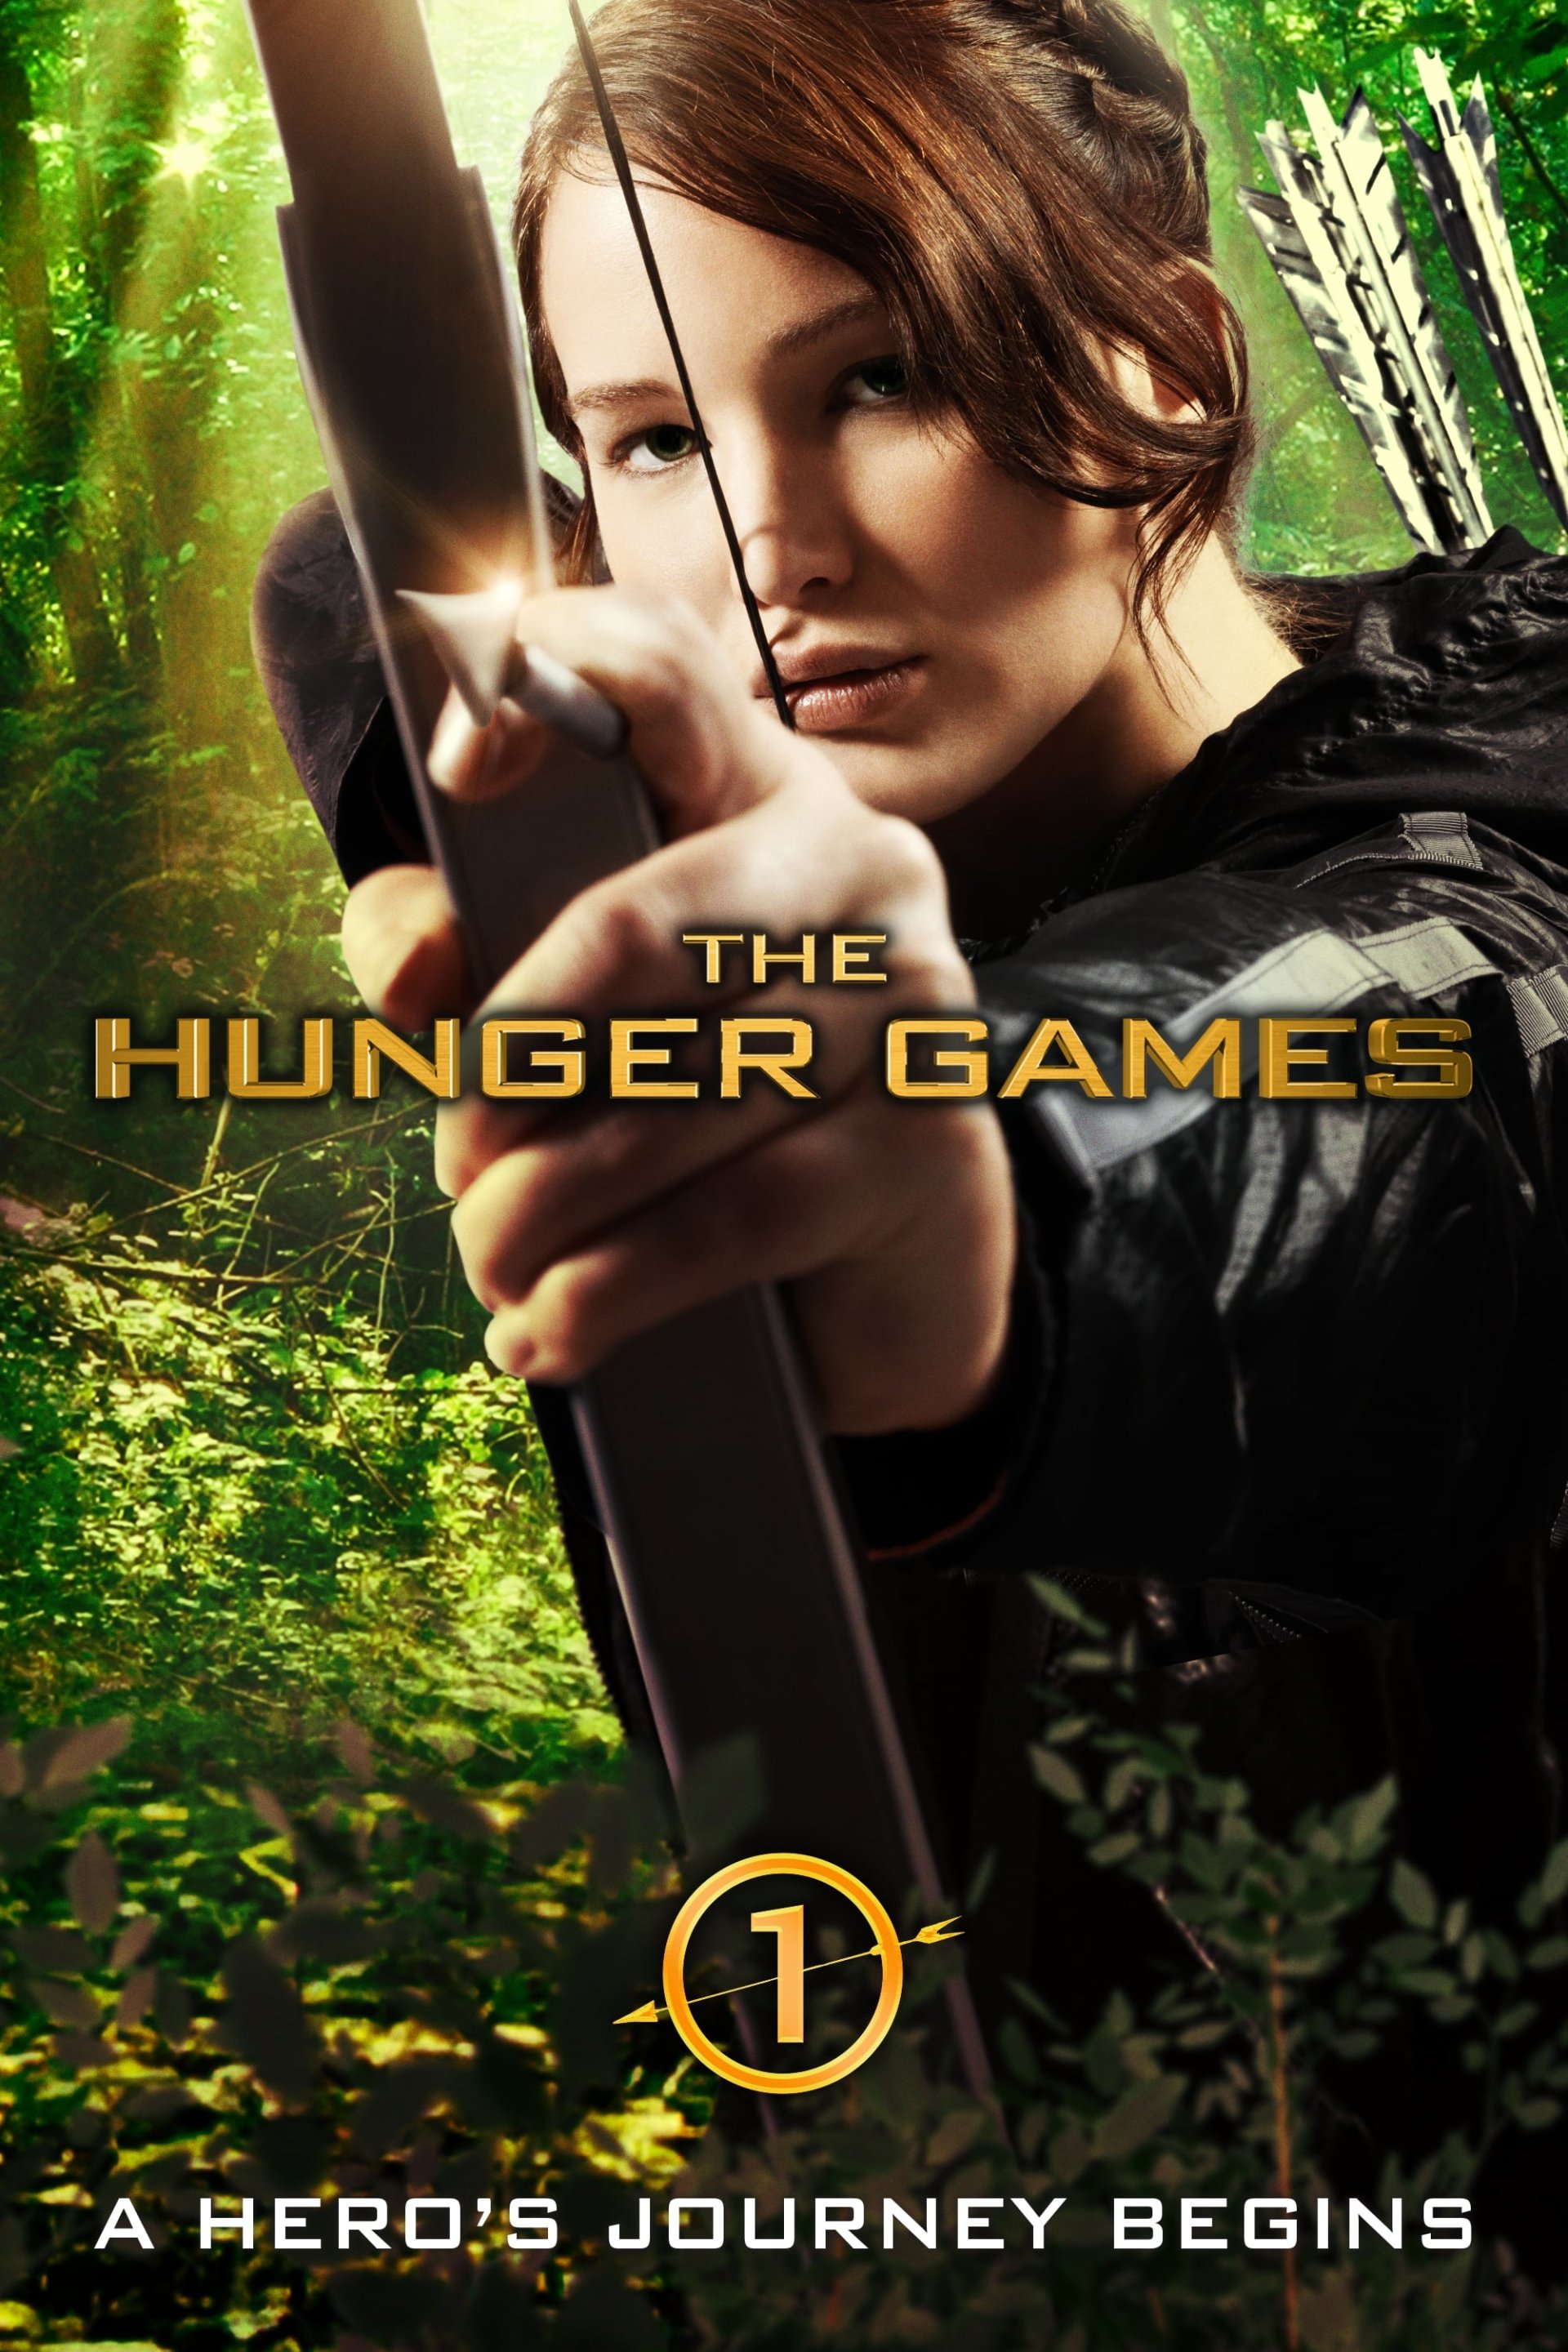 The Hunger Games Movie Poster Id 174335 Image Abyss